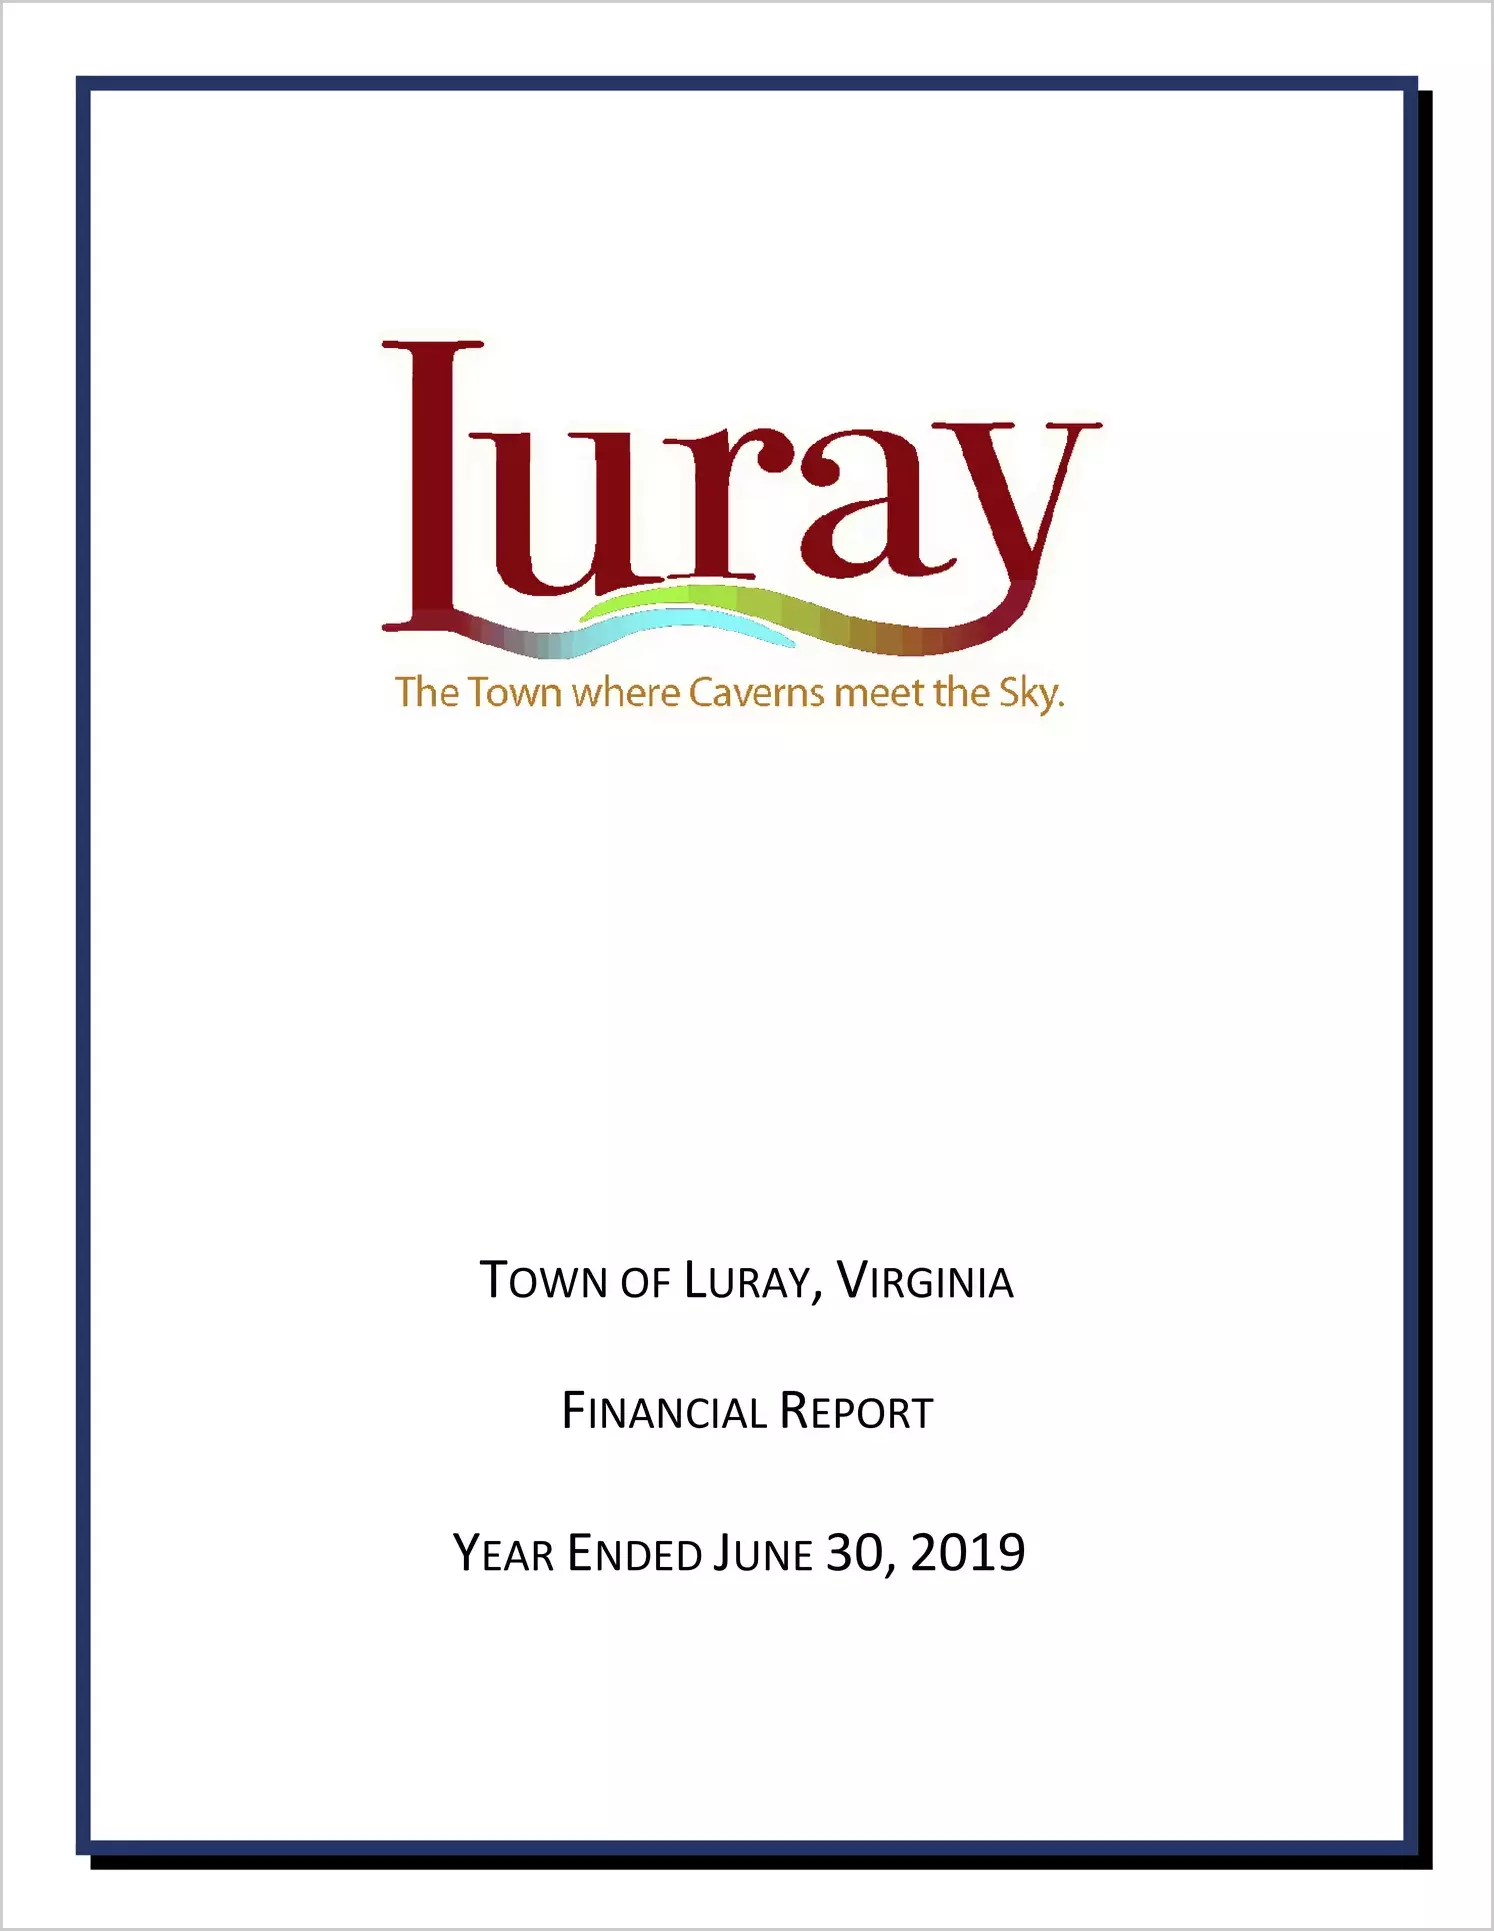 2019 Annual Financial Report for Town of Luray